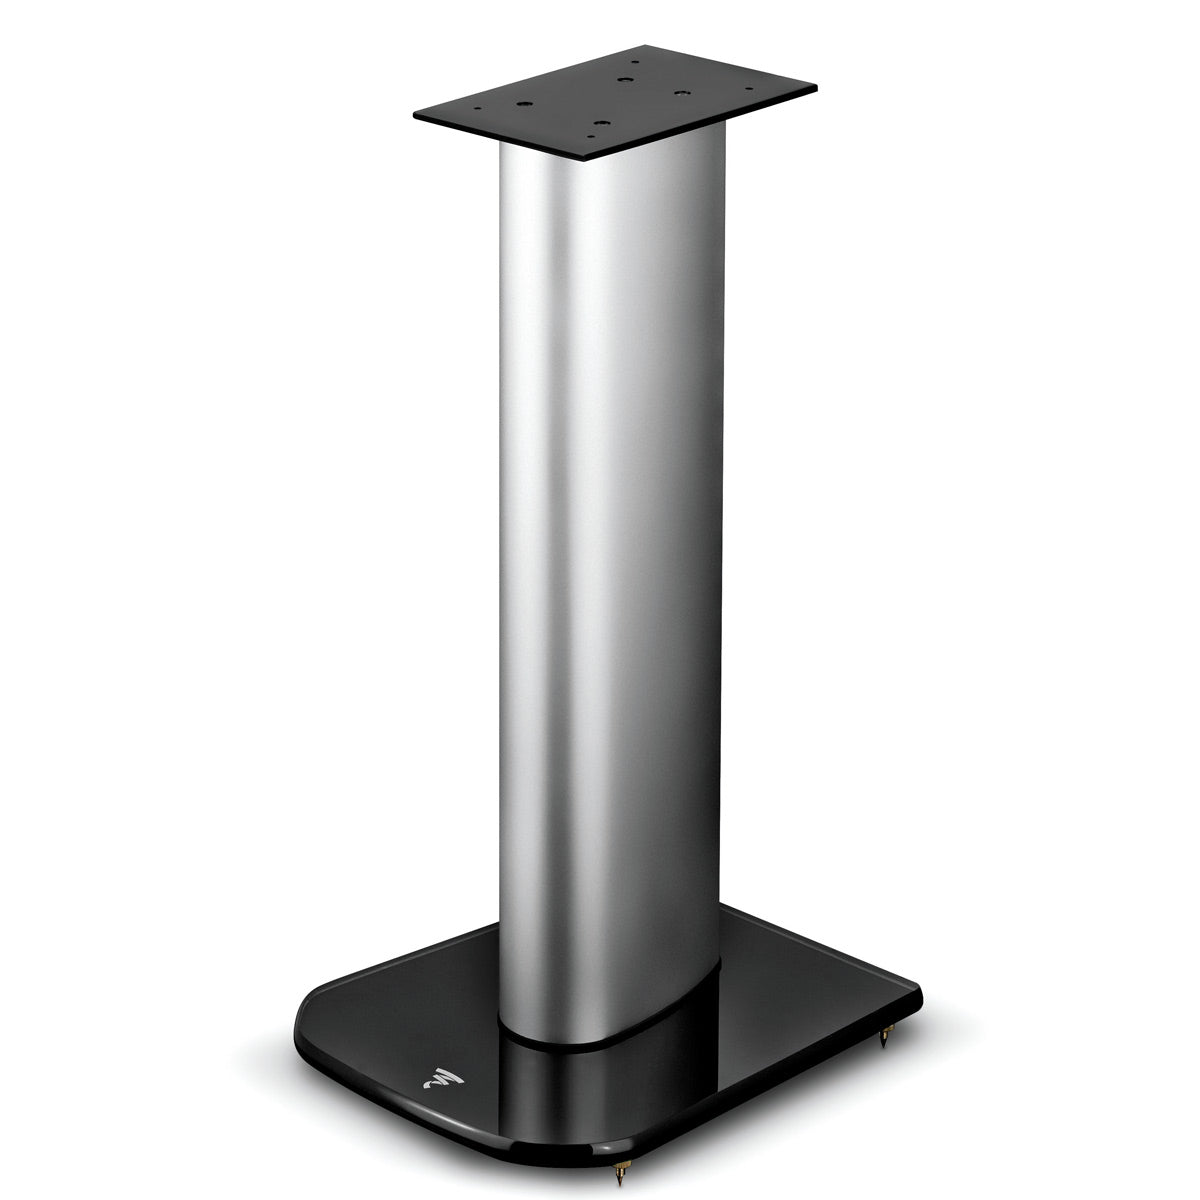 Focal Aria S900 Speaker Stands for Aria 906 and 905 - Pair